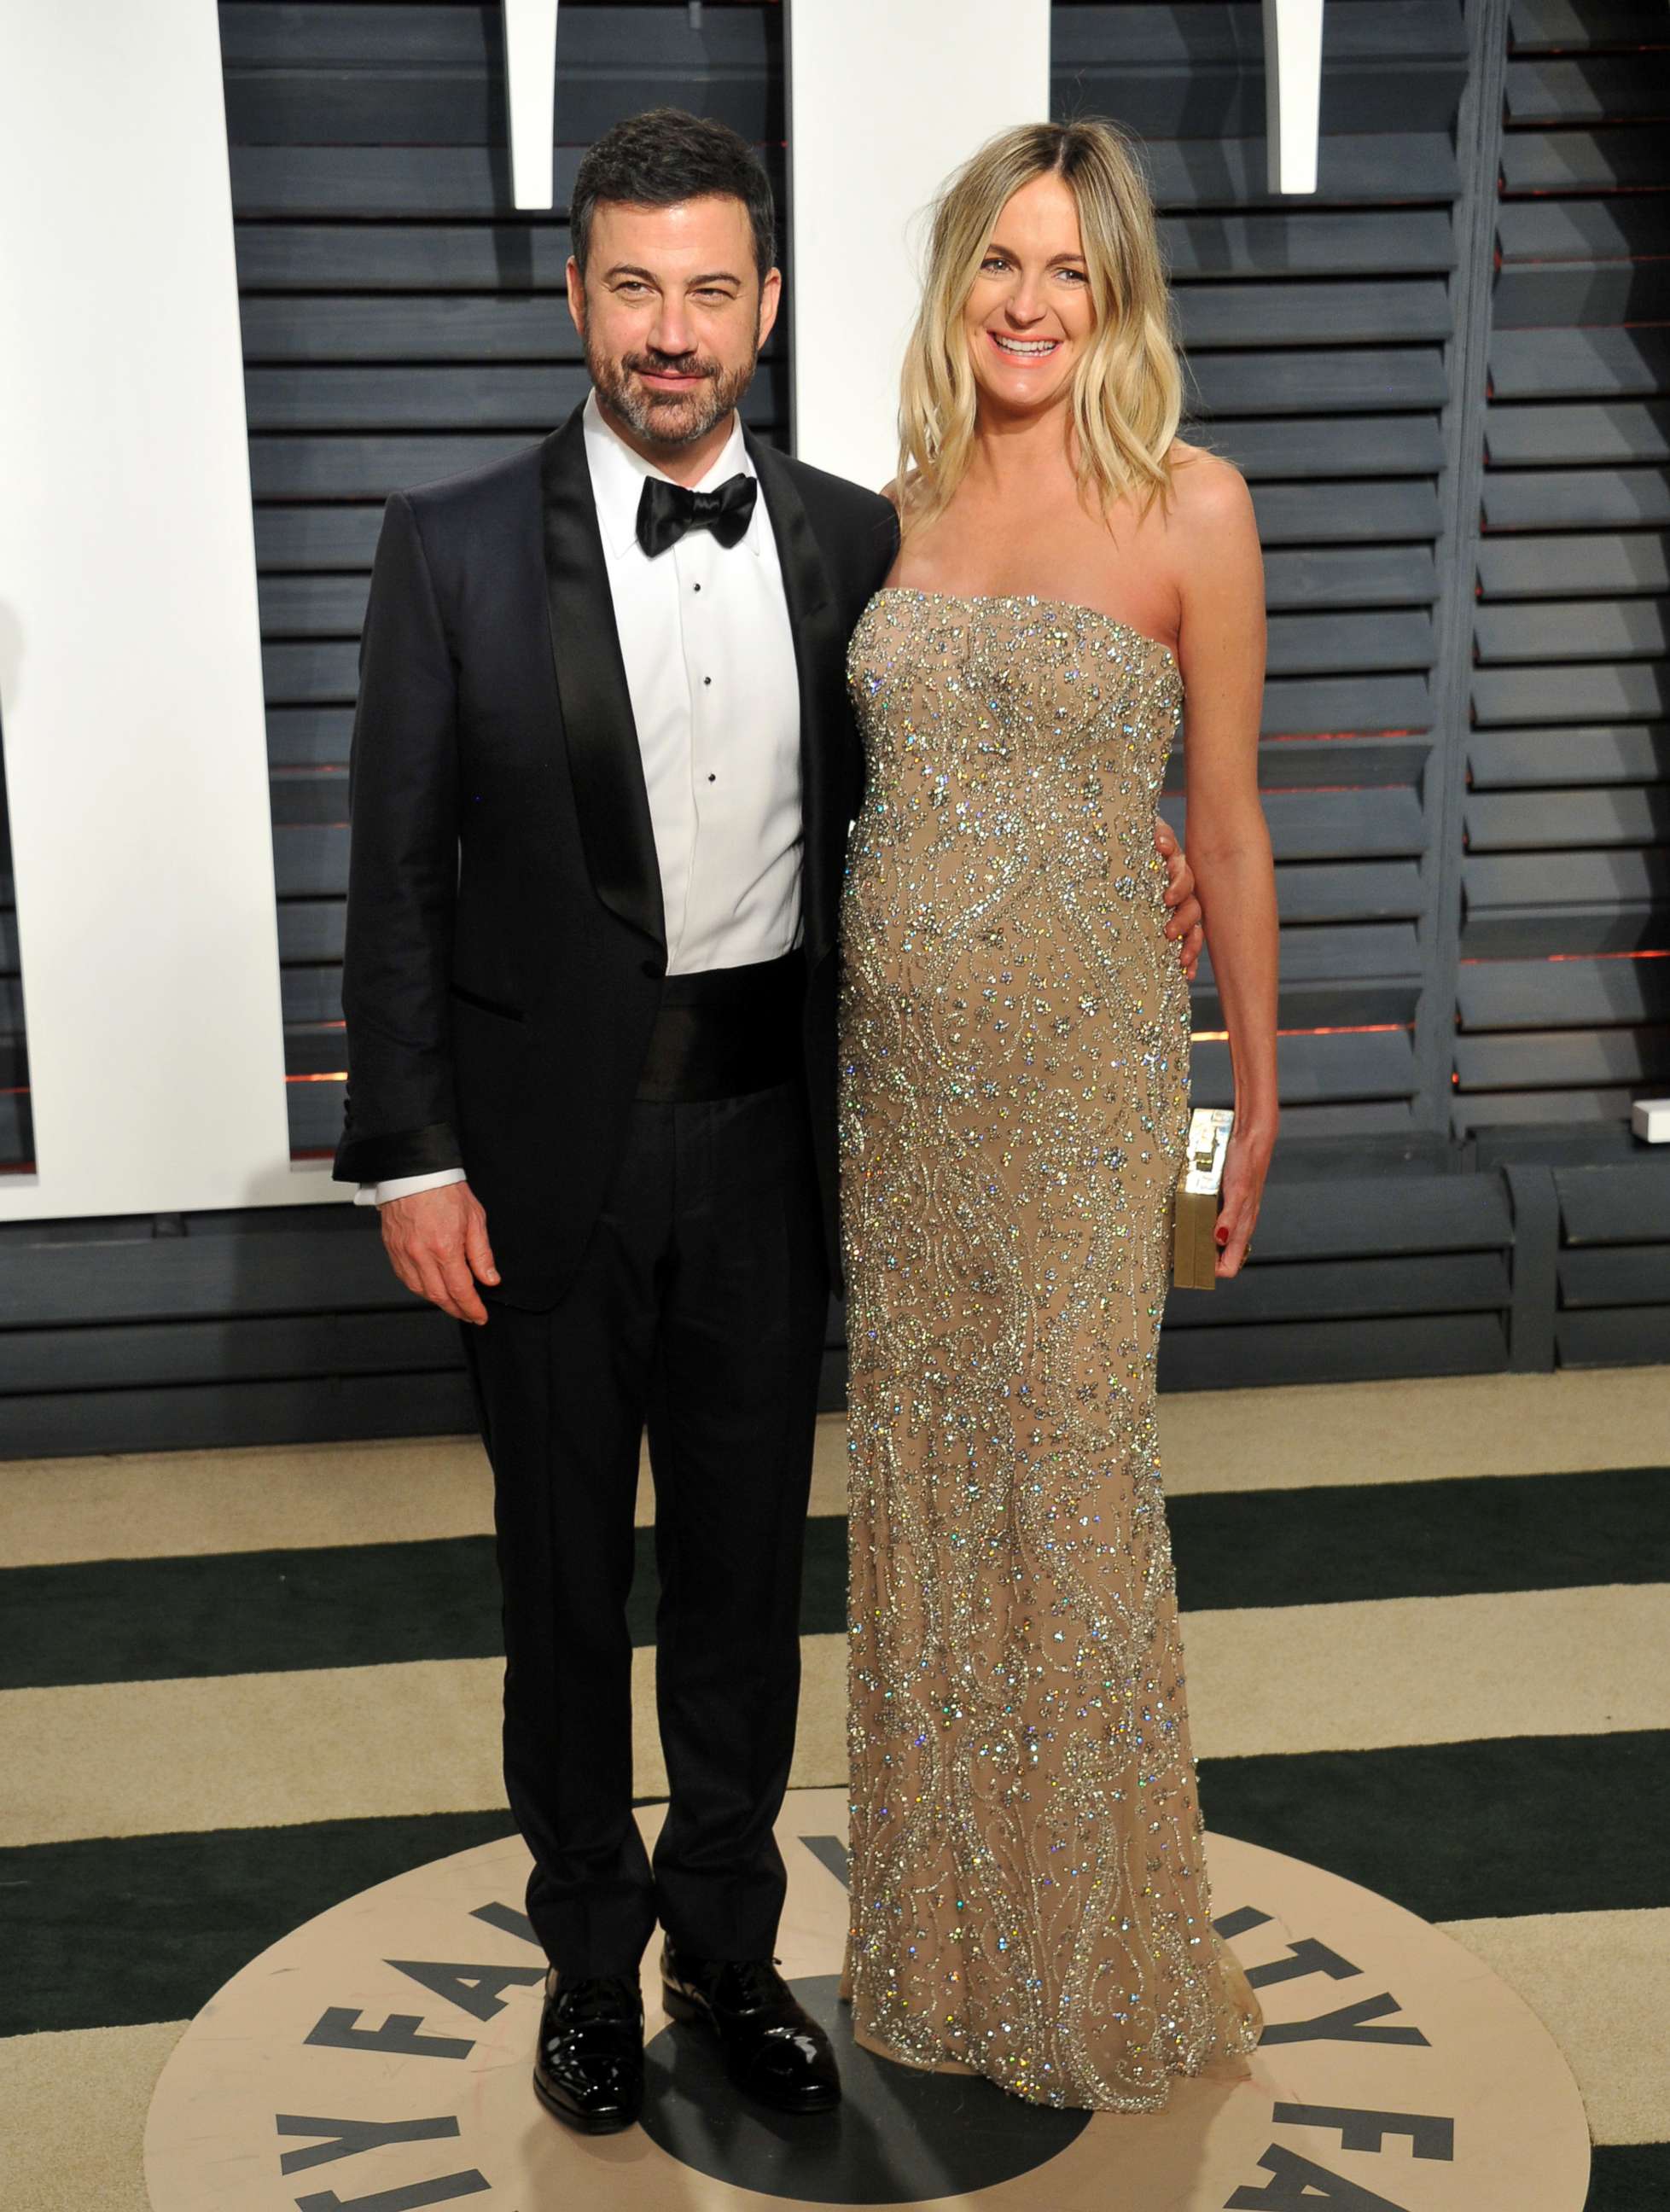 PHOTO: Jimmy Kimmel and wife Molly McNearney arrive at the 2017 Vanity Fair Oscar Party, Feb. 26, 2017, in Beverly Hills, Calif.